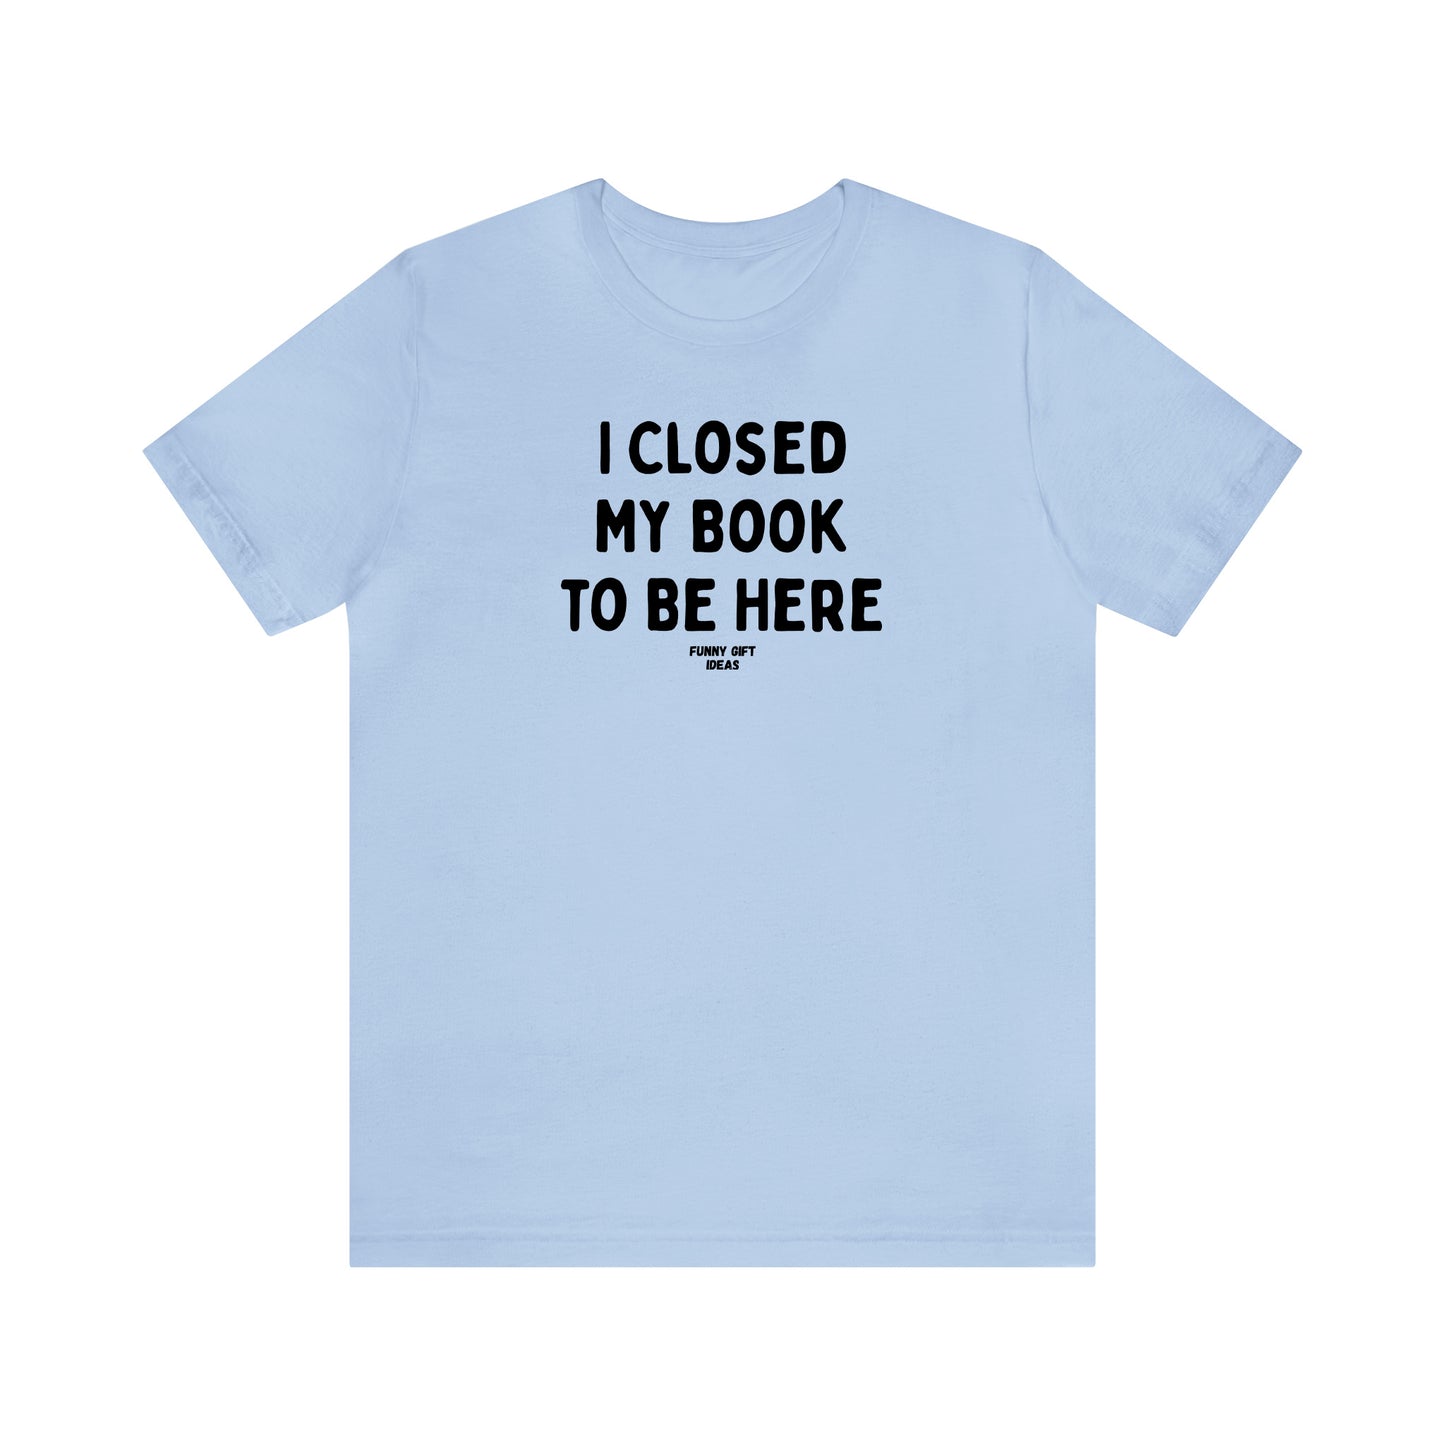 Funny Shirts for Women - I Closed My Book to Be Here - Women's T Shirts